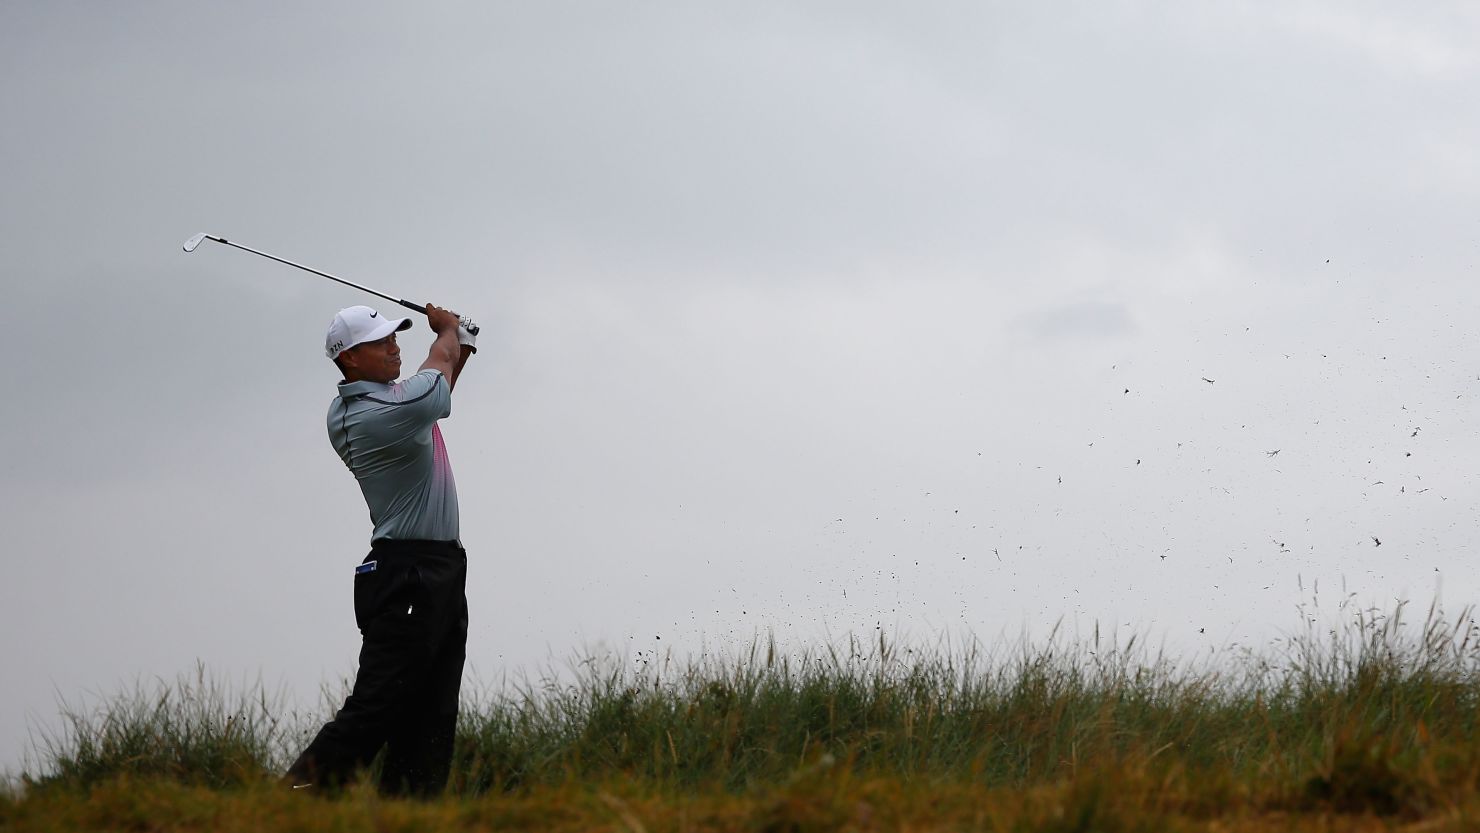 Tiger Woods struggled with consistency again during the third round of the Open Championship at Hoylake. 